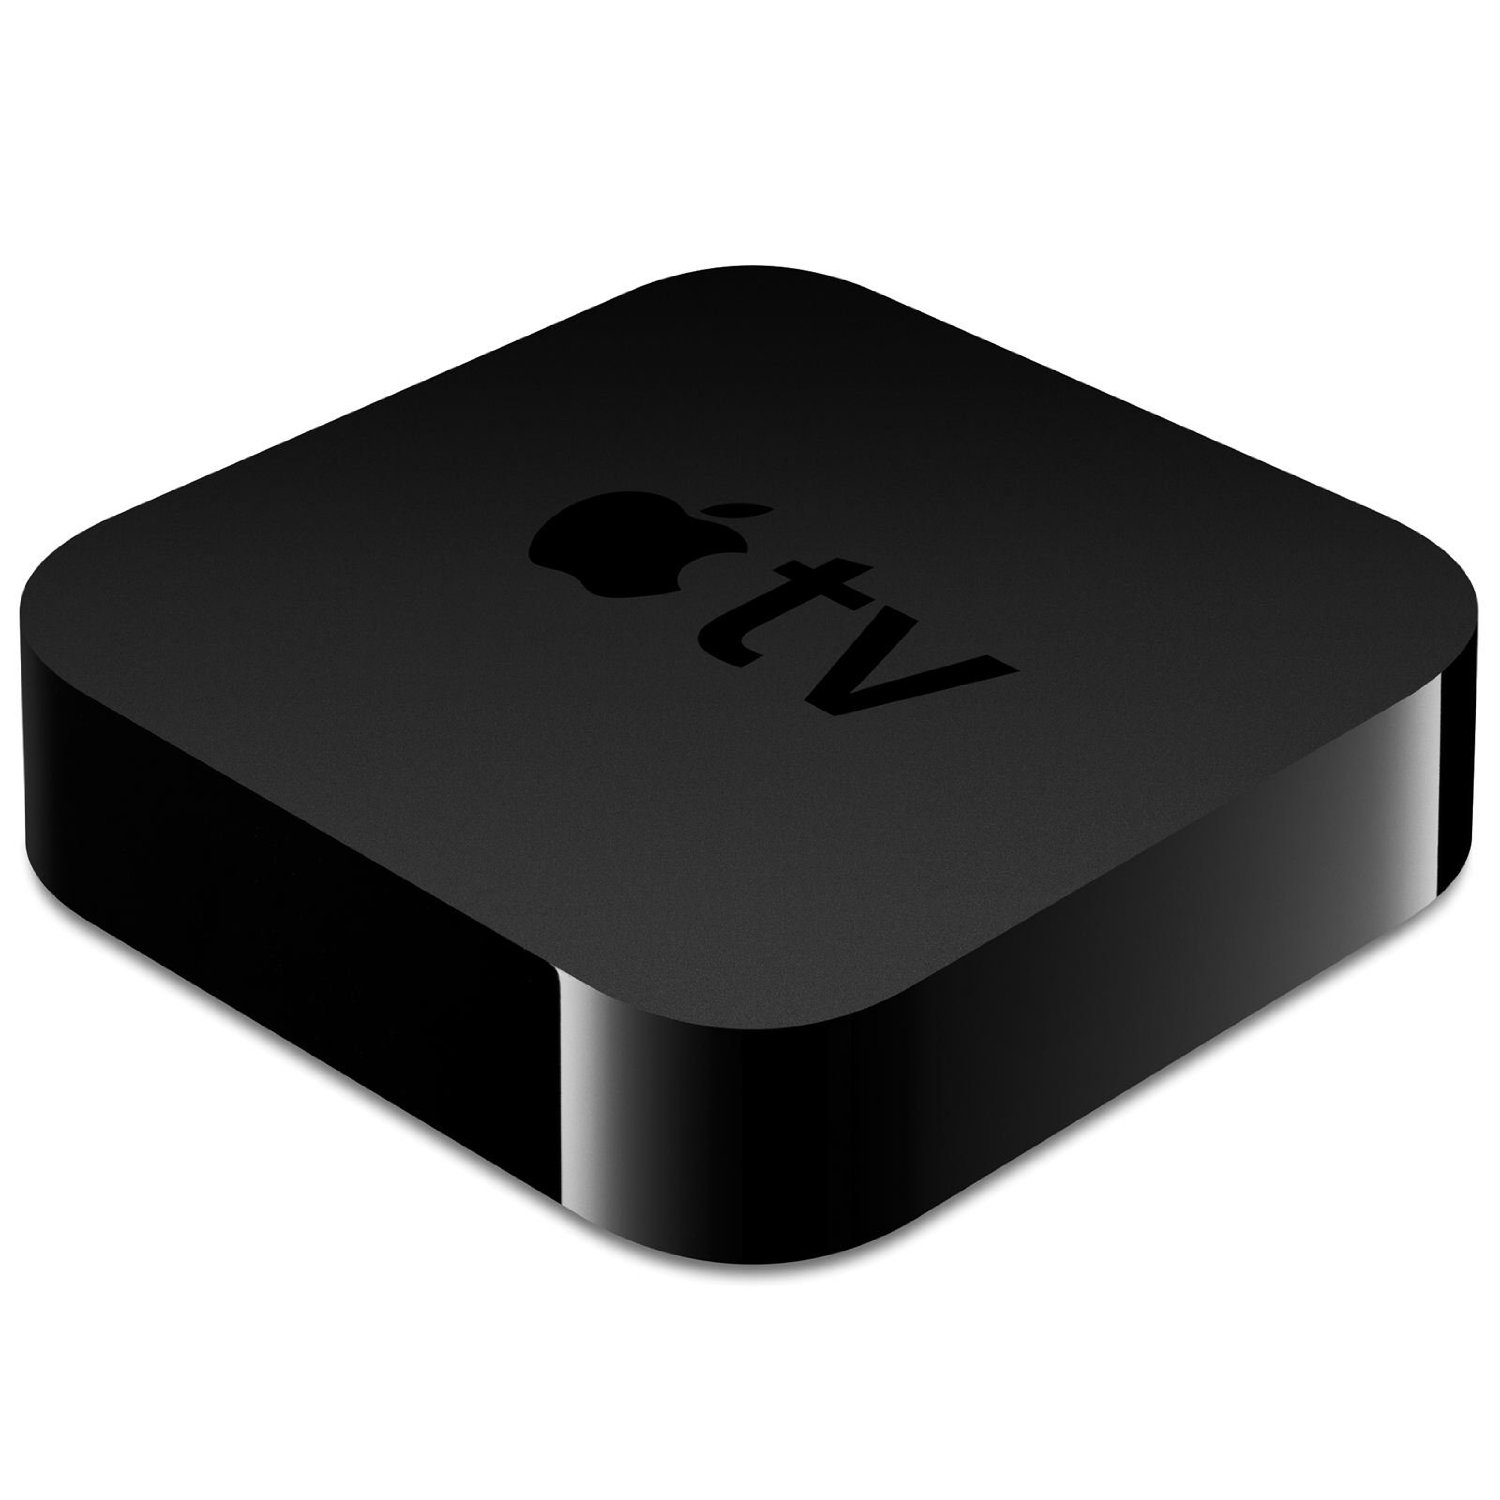 Apple TV (3rd Generation - Revision A)